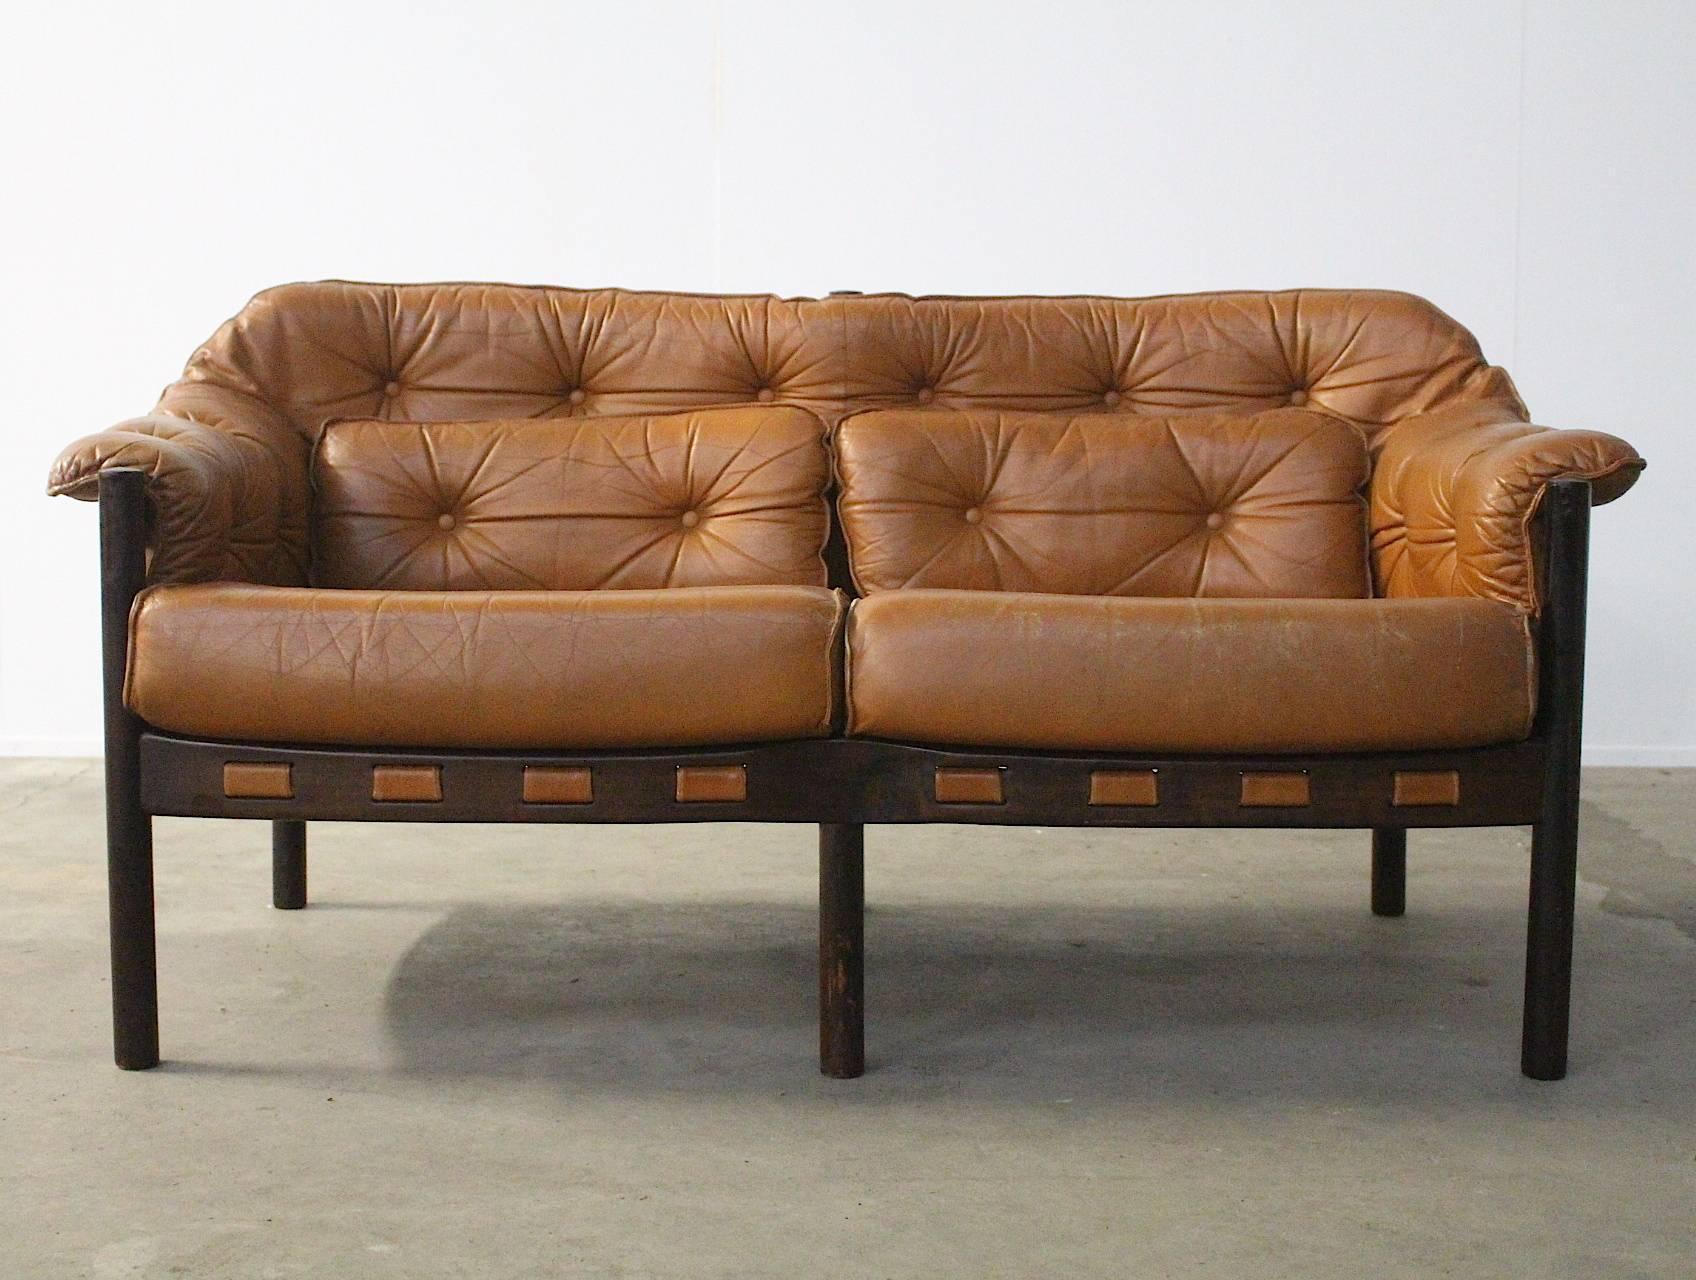 Sven Ellekaer for Coja Two-Seat Settee Sofa in soft Camel Leather In Good Condition For Sale In Amsterdam, NL